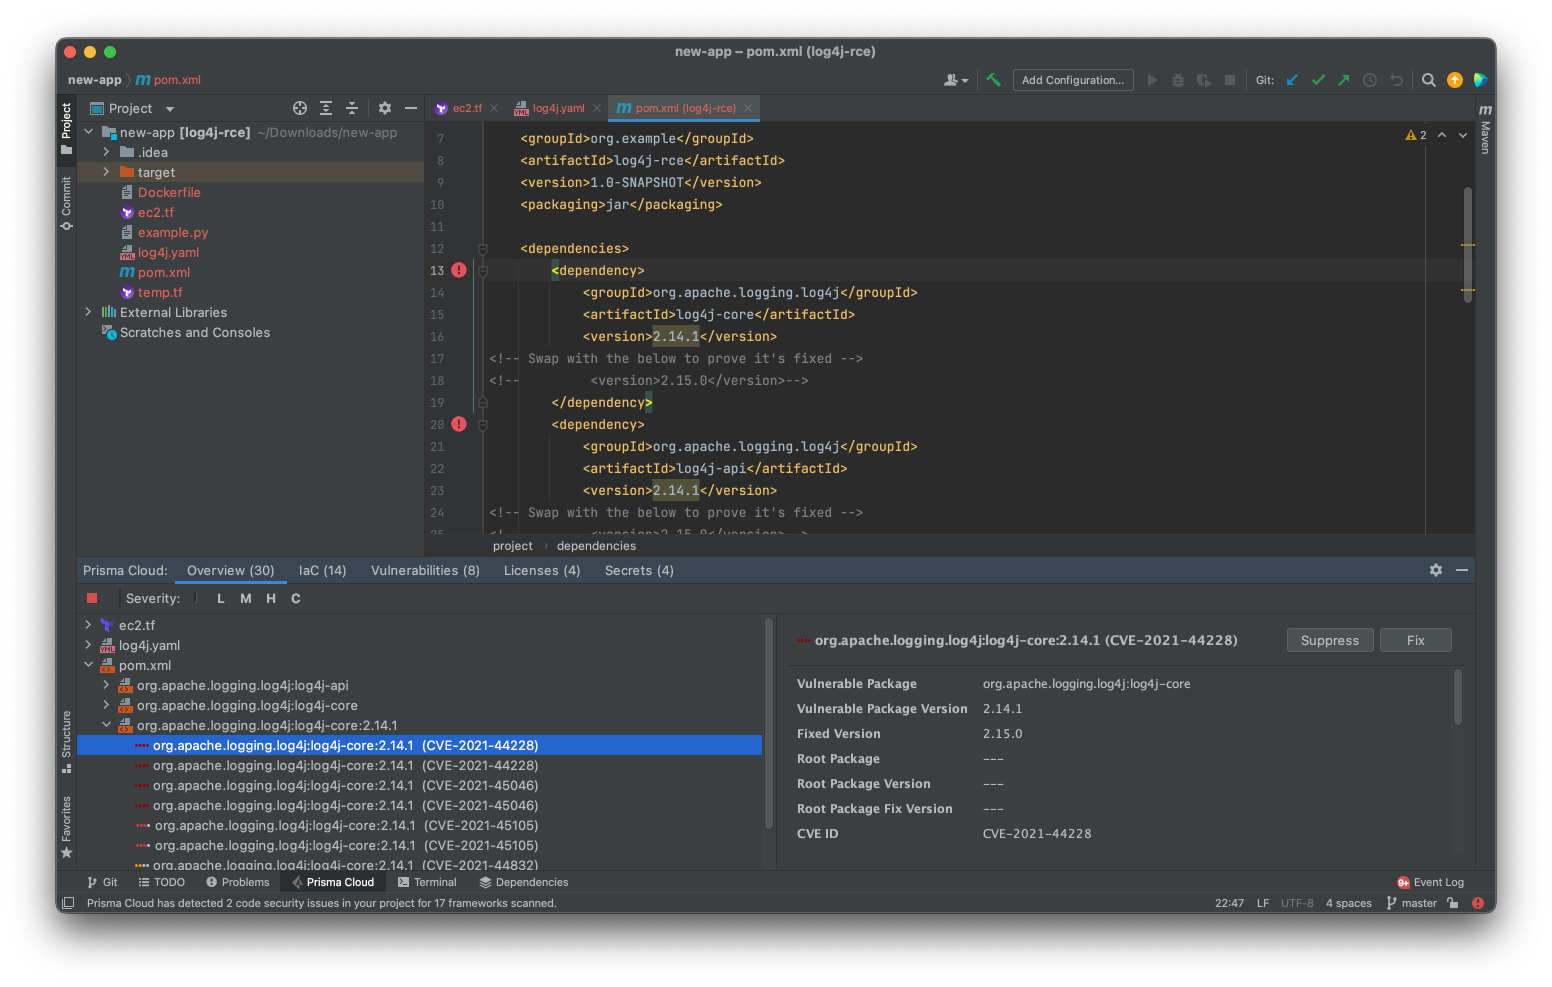 IDE showing vulnerabilities and how to fix them in context